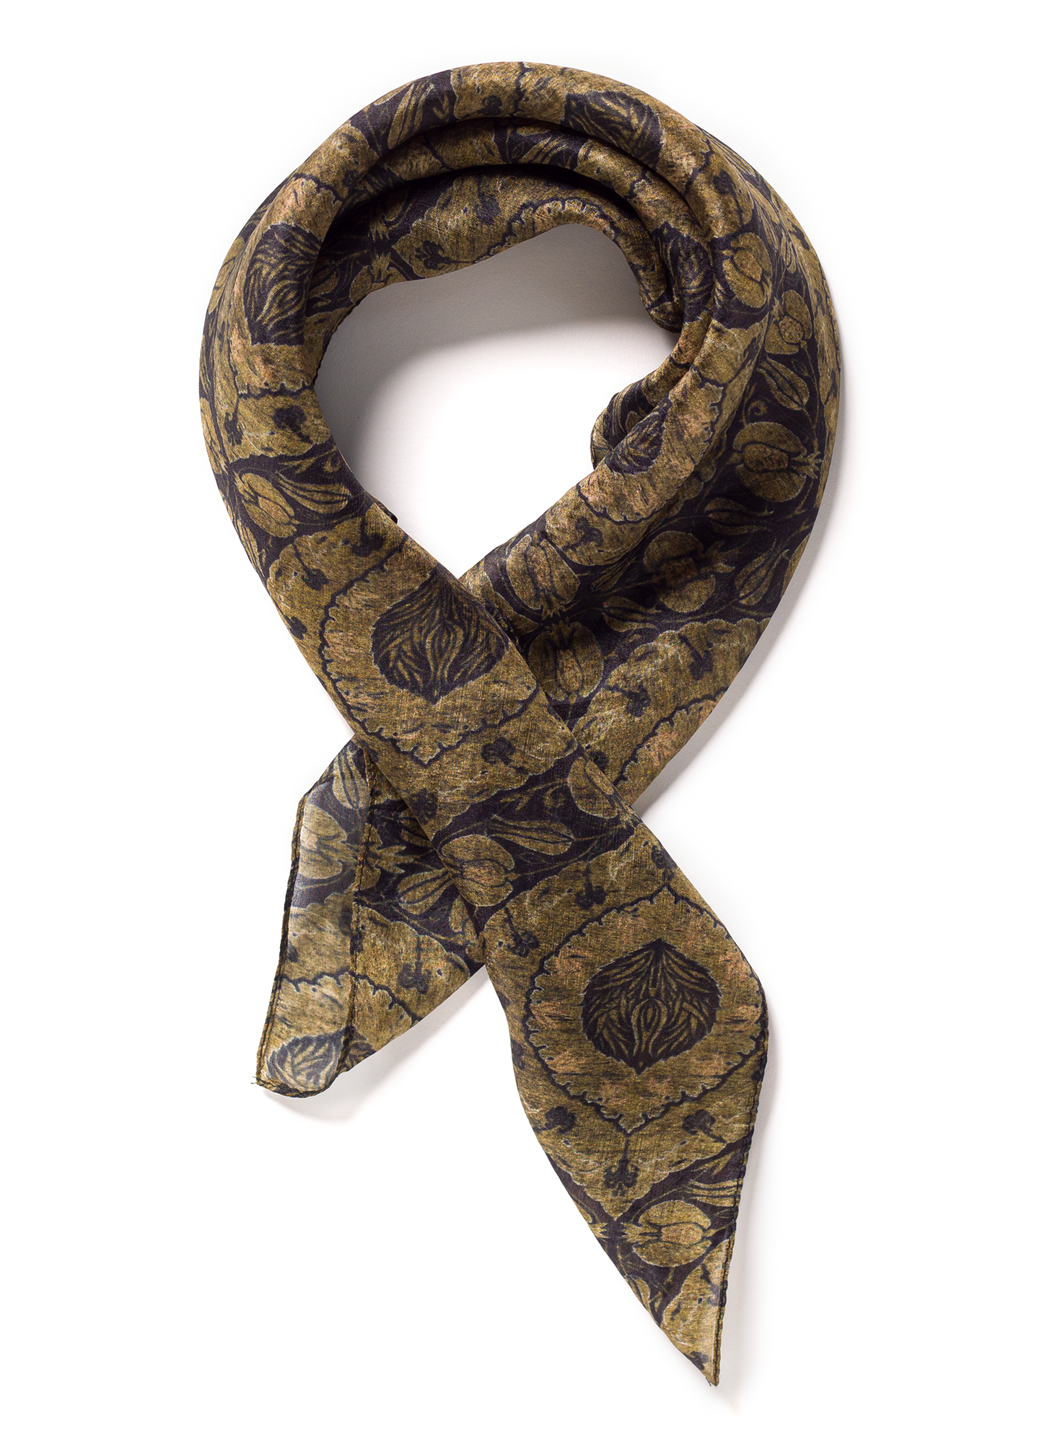 maryink Brown Bandana for Women and Men, Hand Screen Printed, 100% Cotton, Square Scarf, Made in USA, Four Elements Design